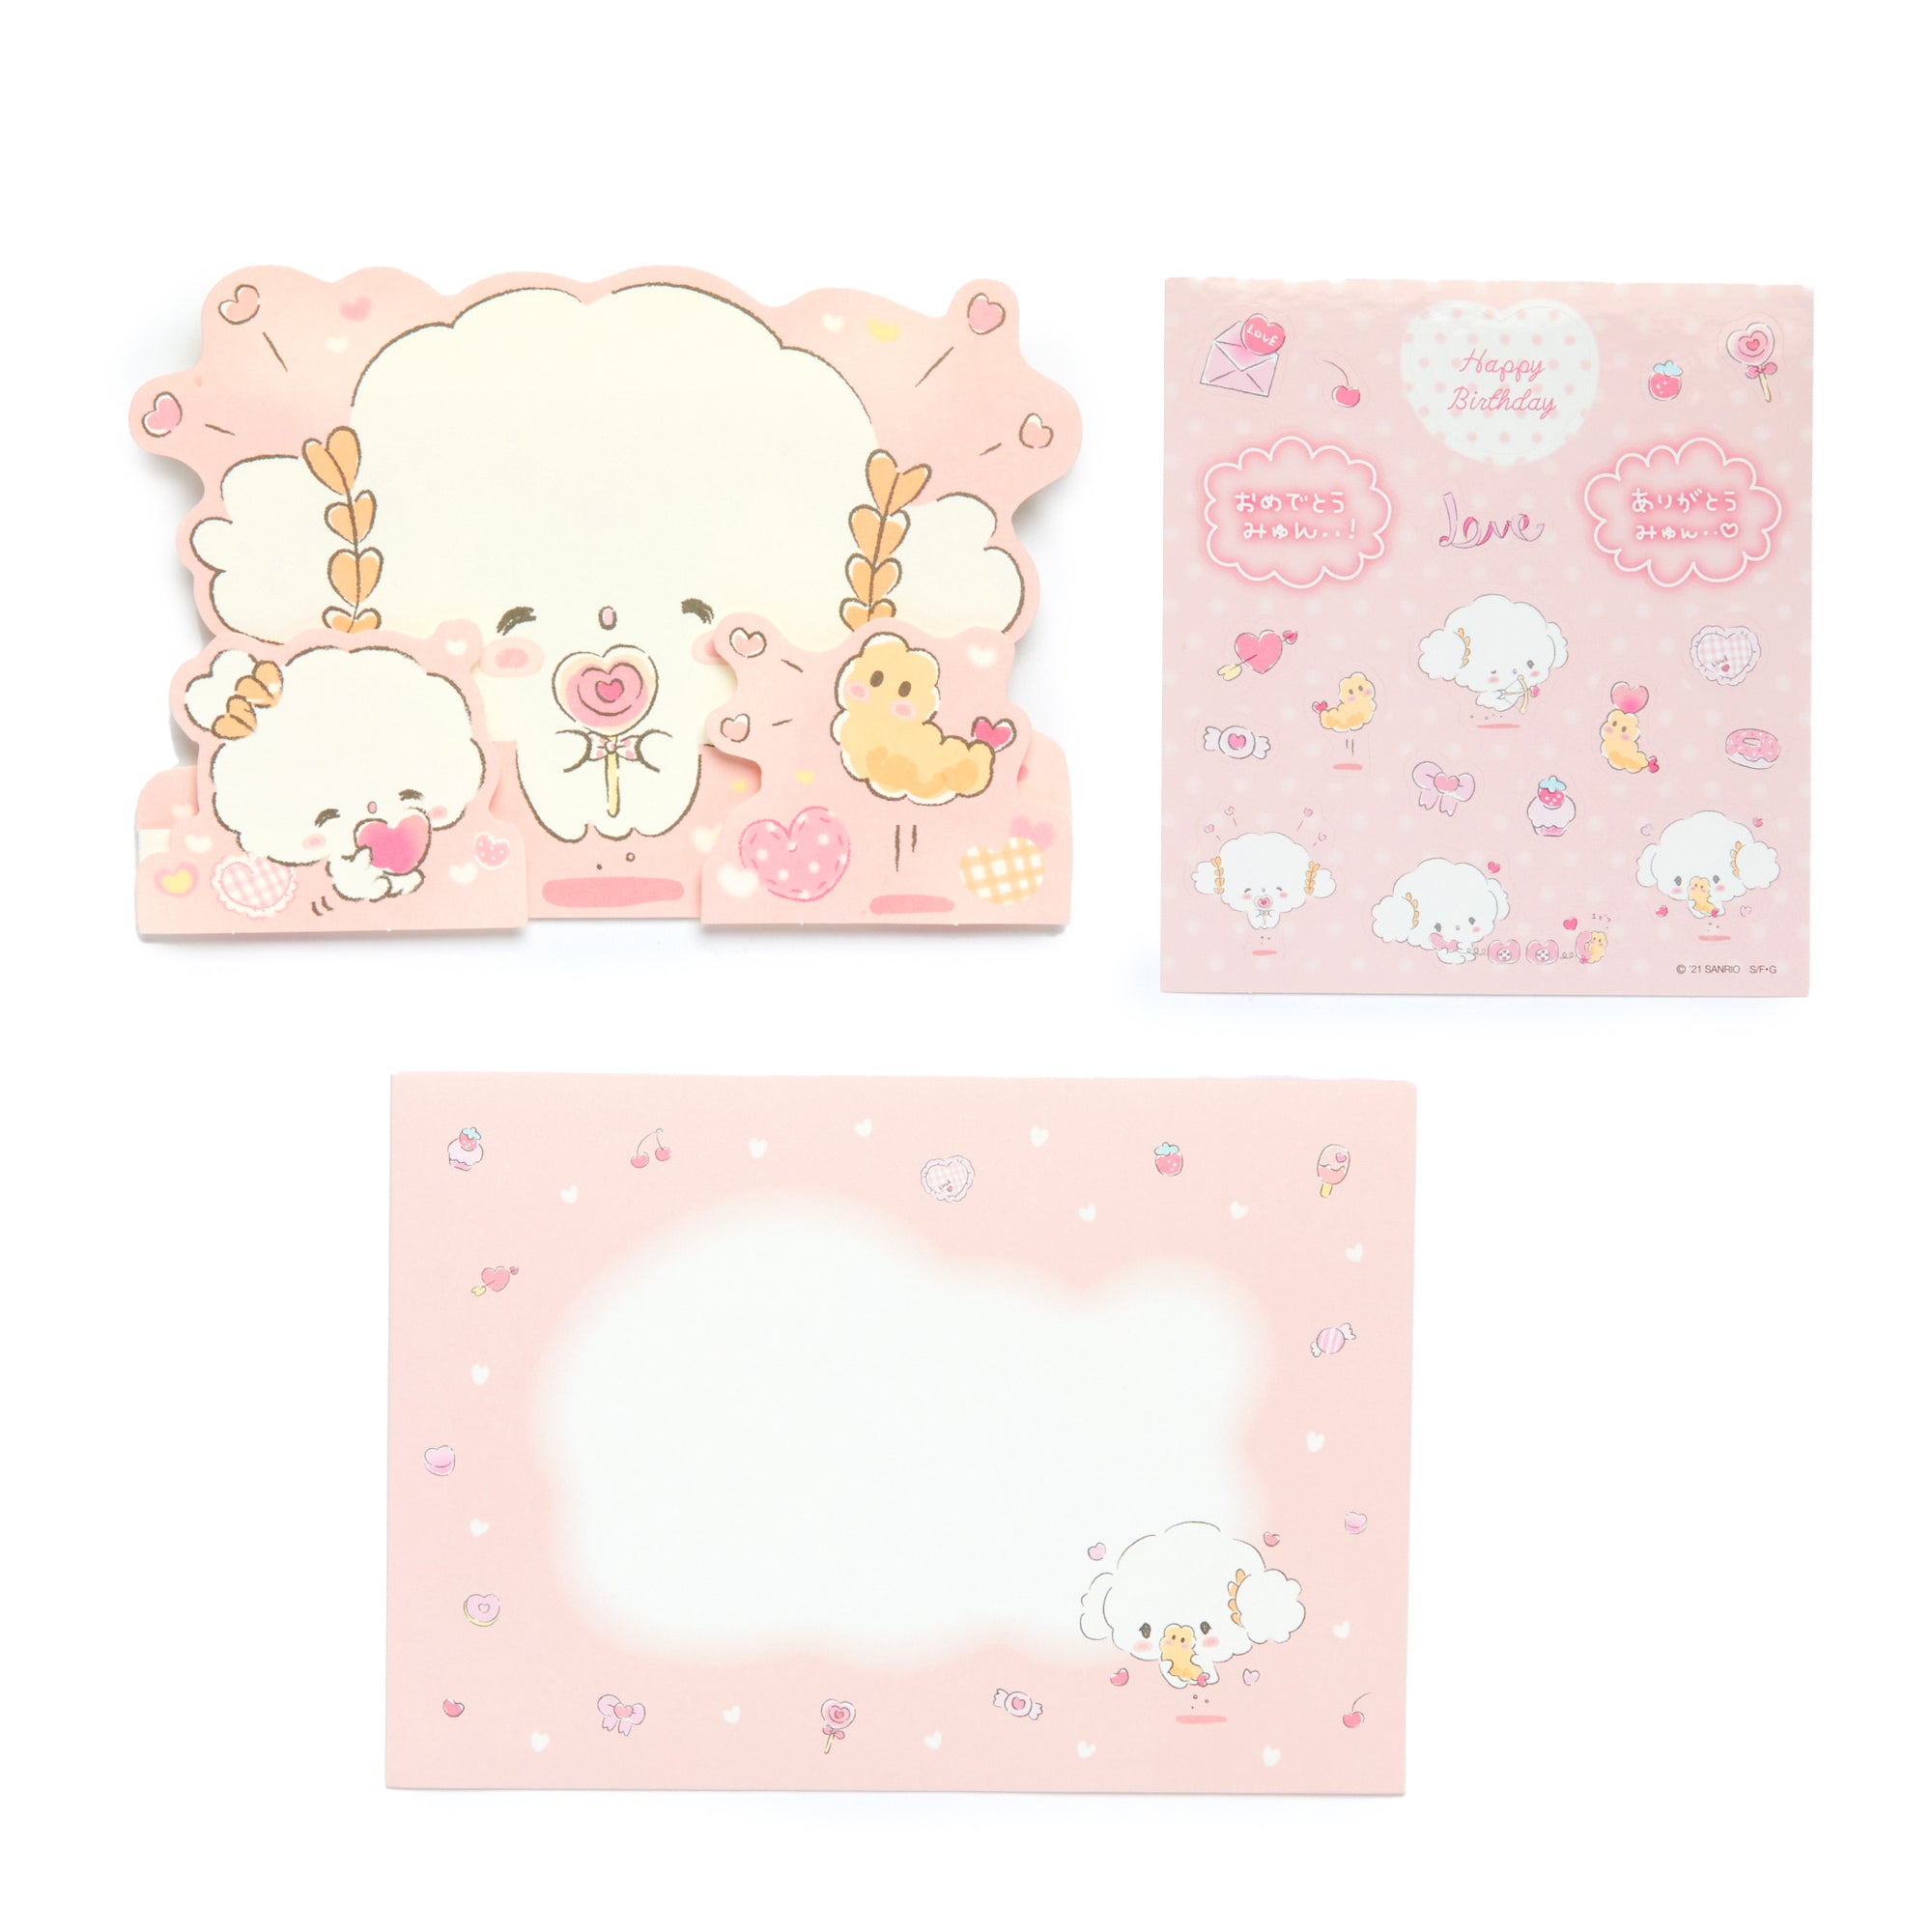 Cogimyun Stickers and Greeting Card Stationery Japan Original   